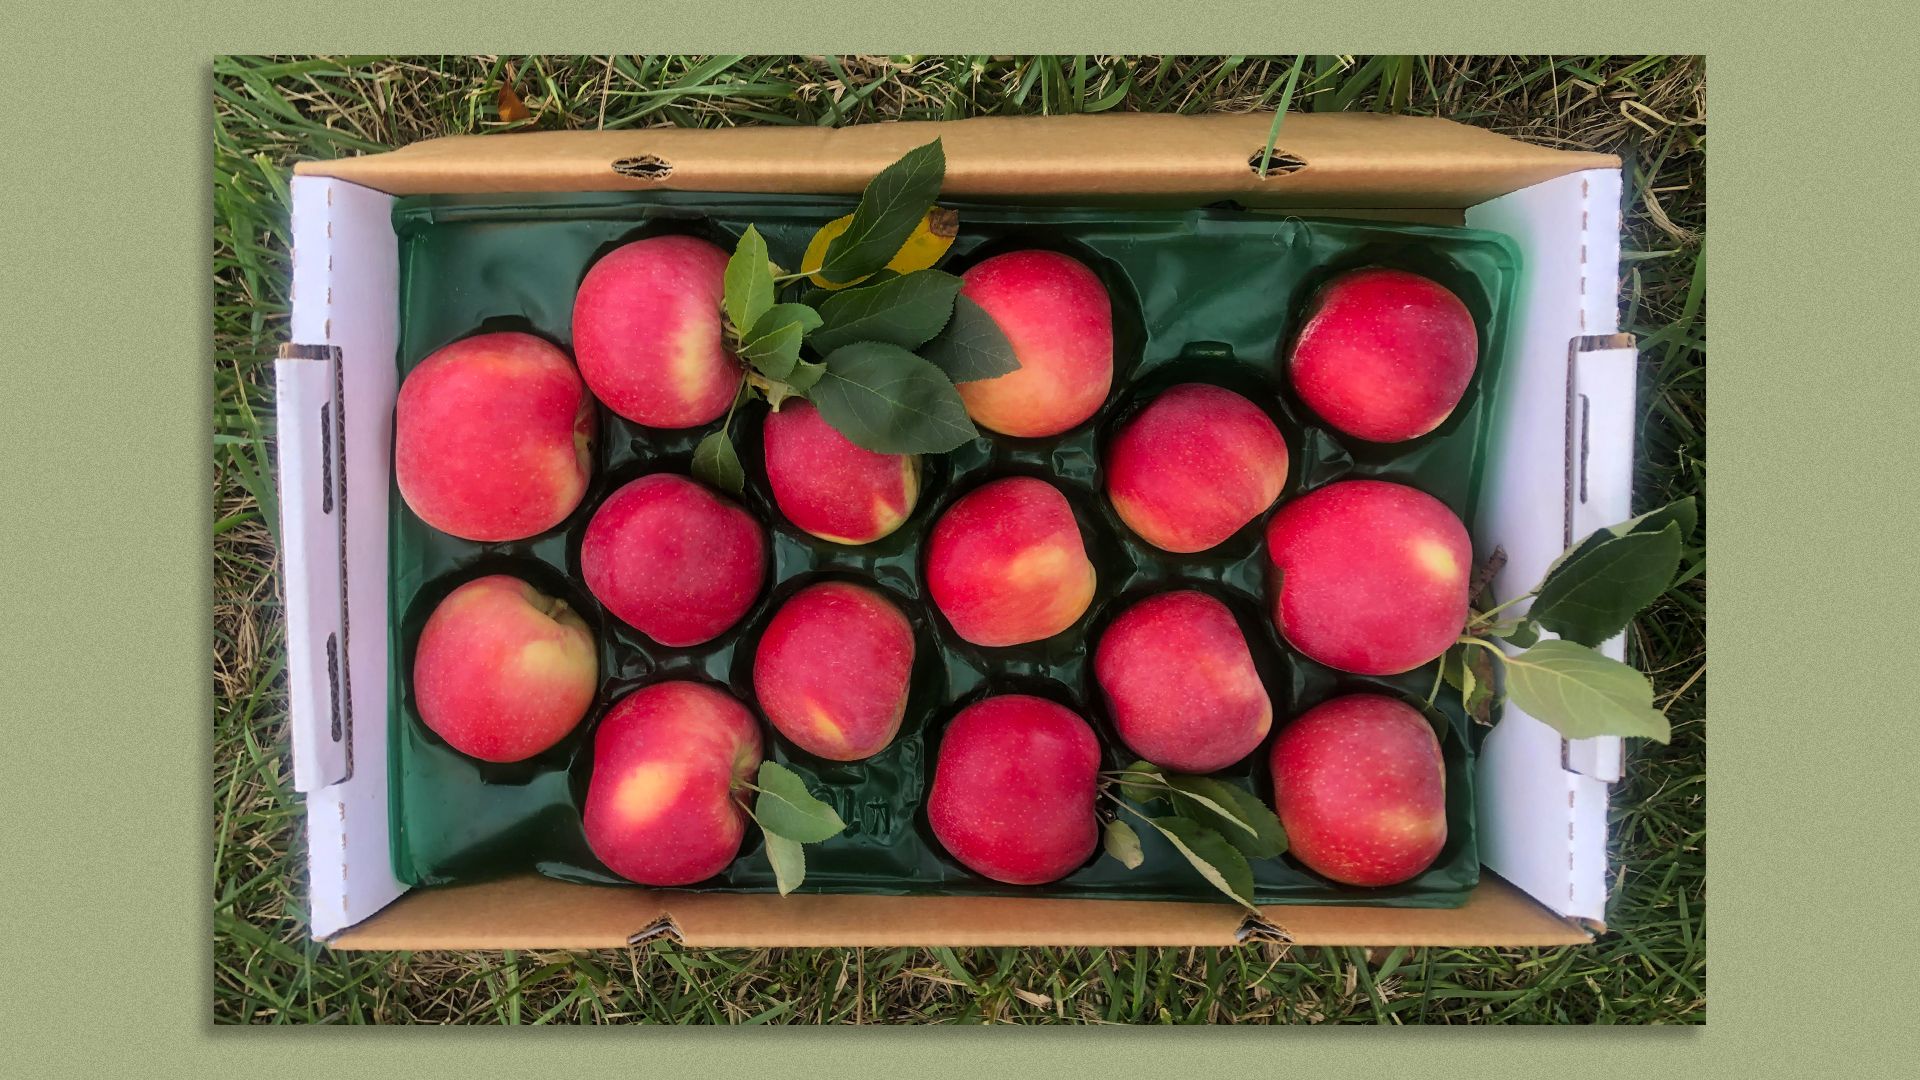 15 bright red apples in a cardboard box placed on grass 